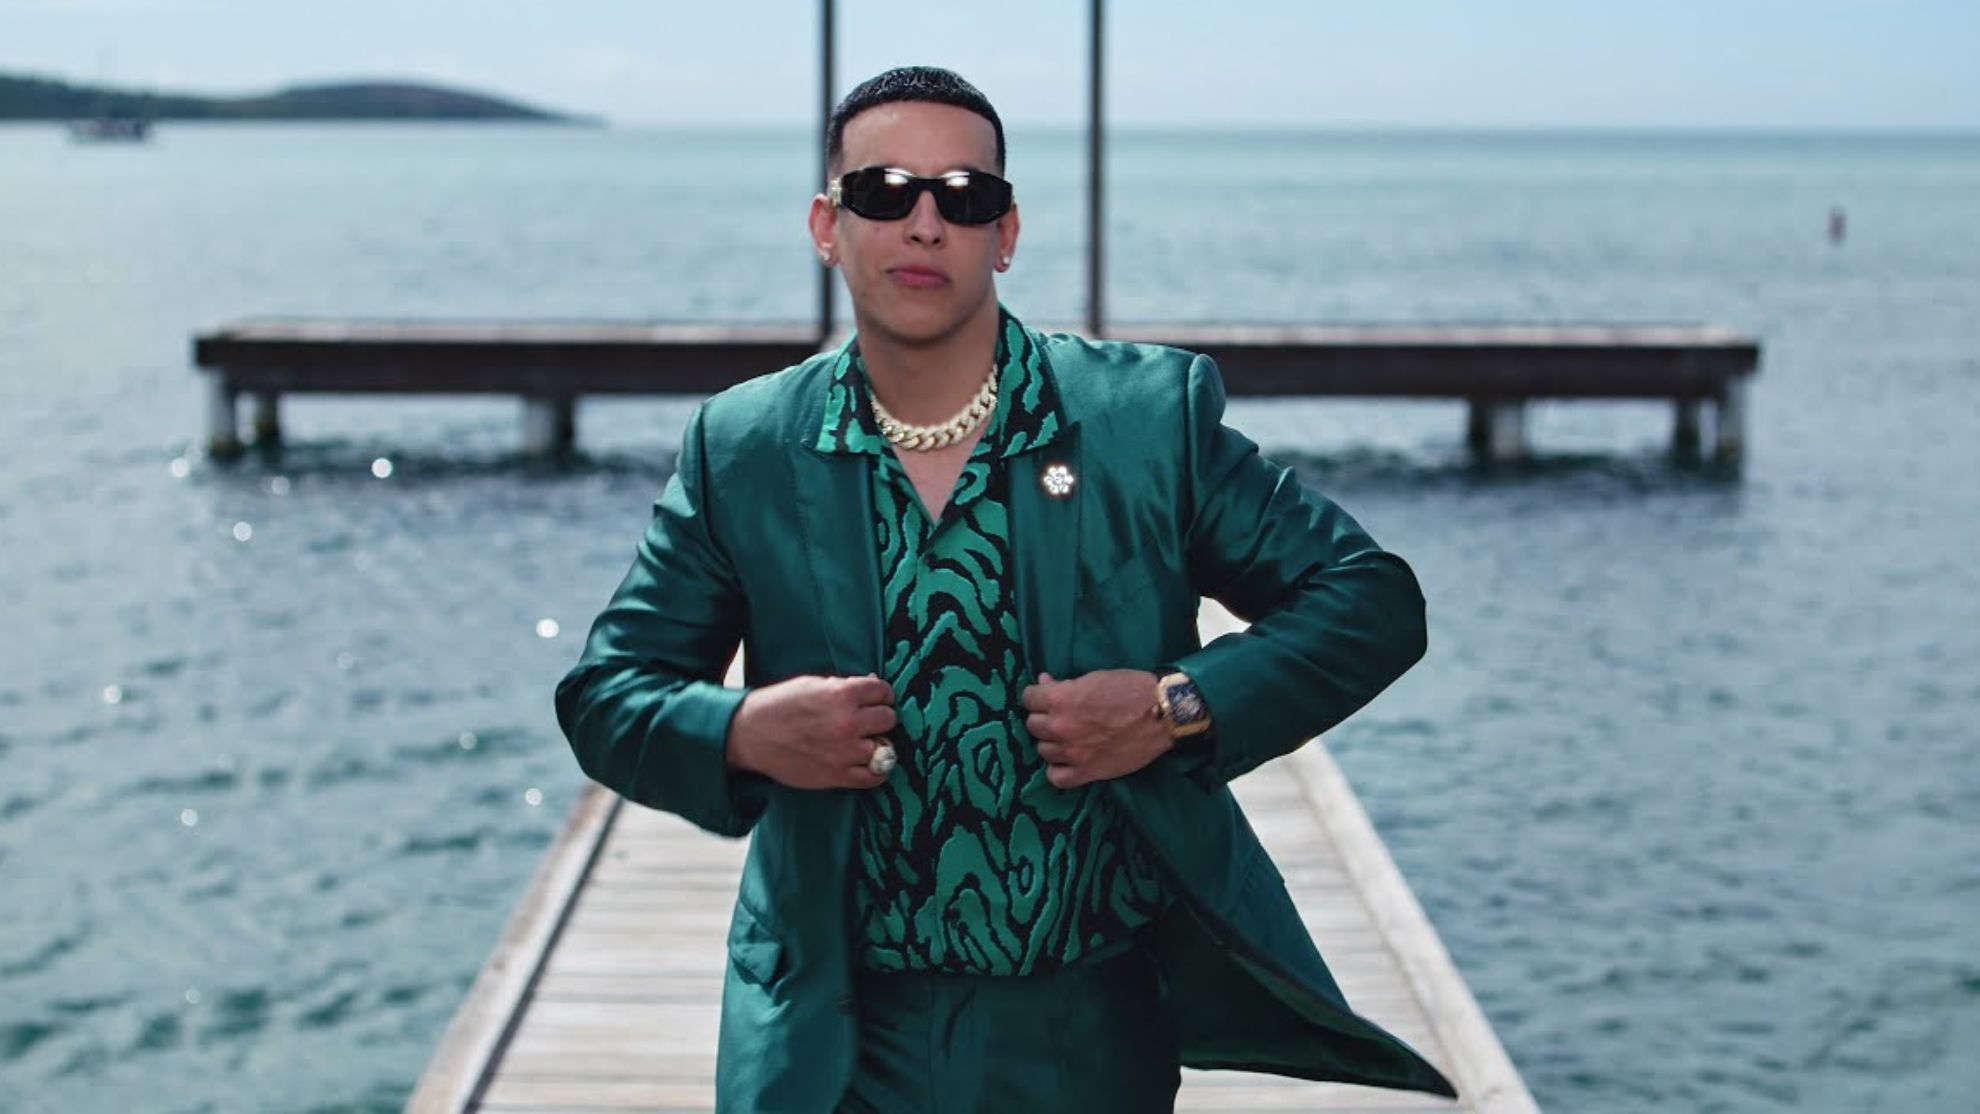 Daddy Yankee was one of many high profile celebrities that were scammed.